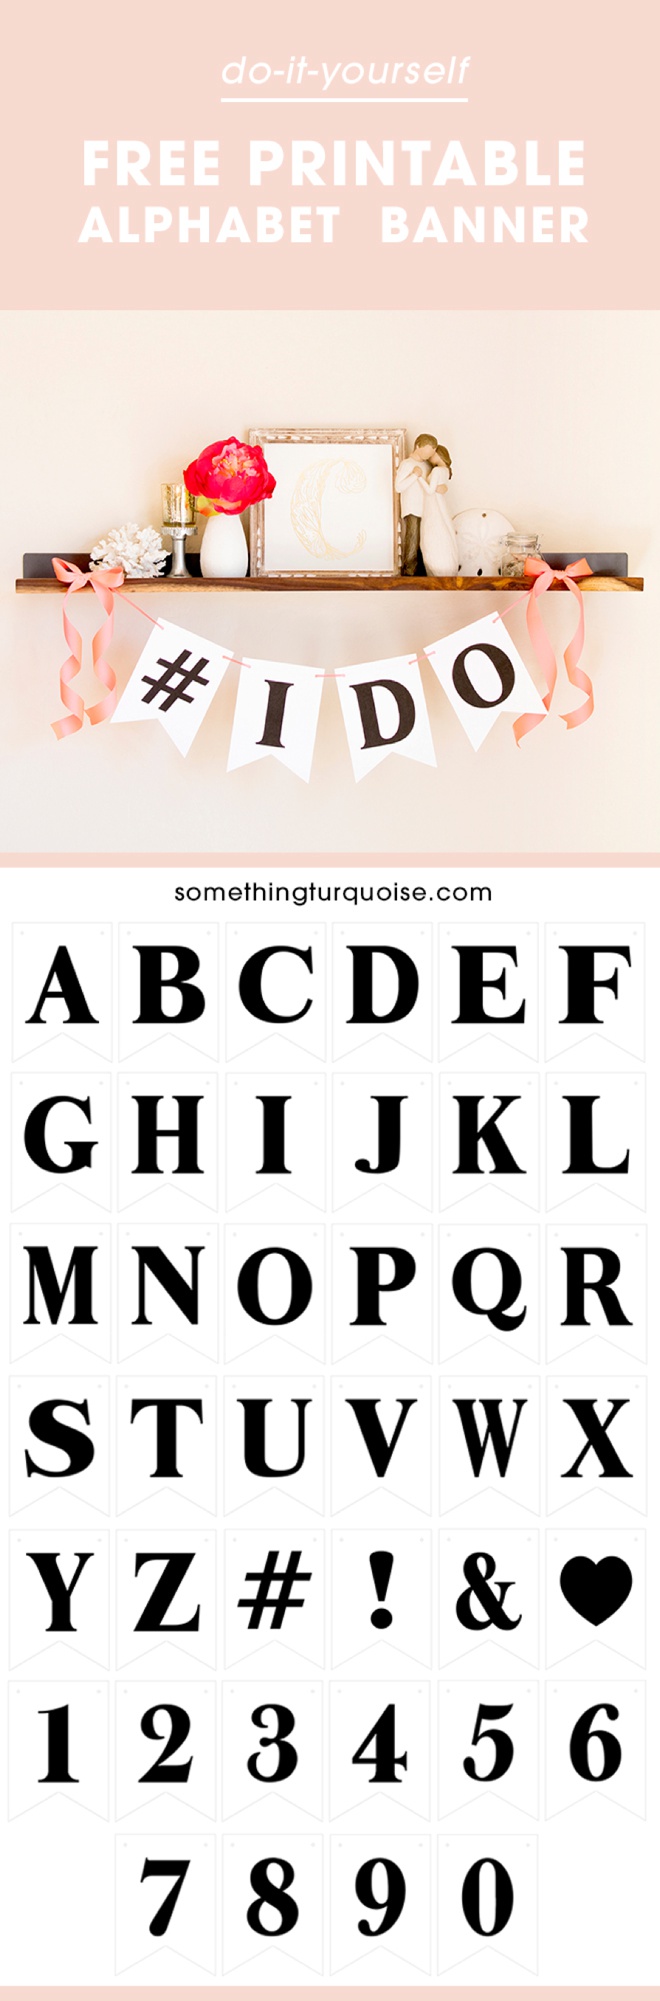 FREE Printable Alphabet and Number Banner! Adorable! Regarding Printable Letter Templates For Banners